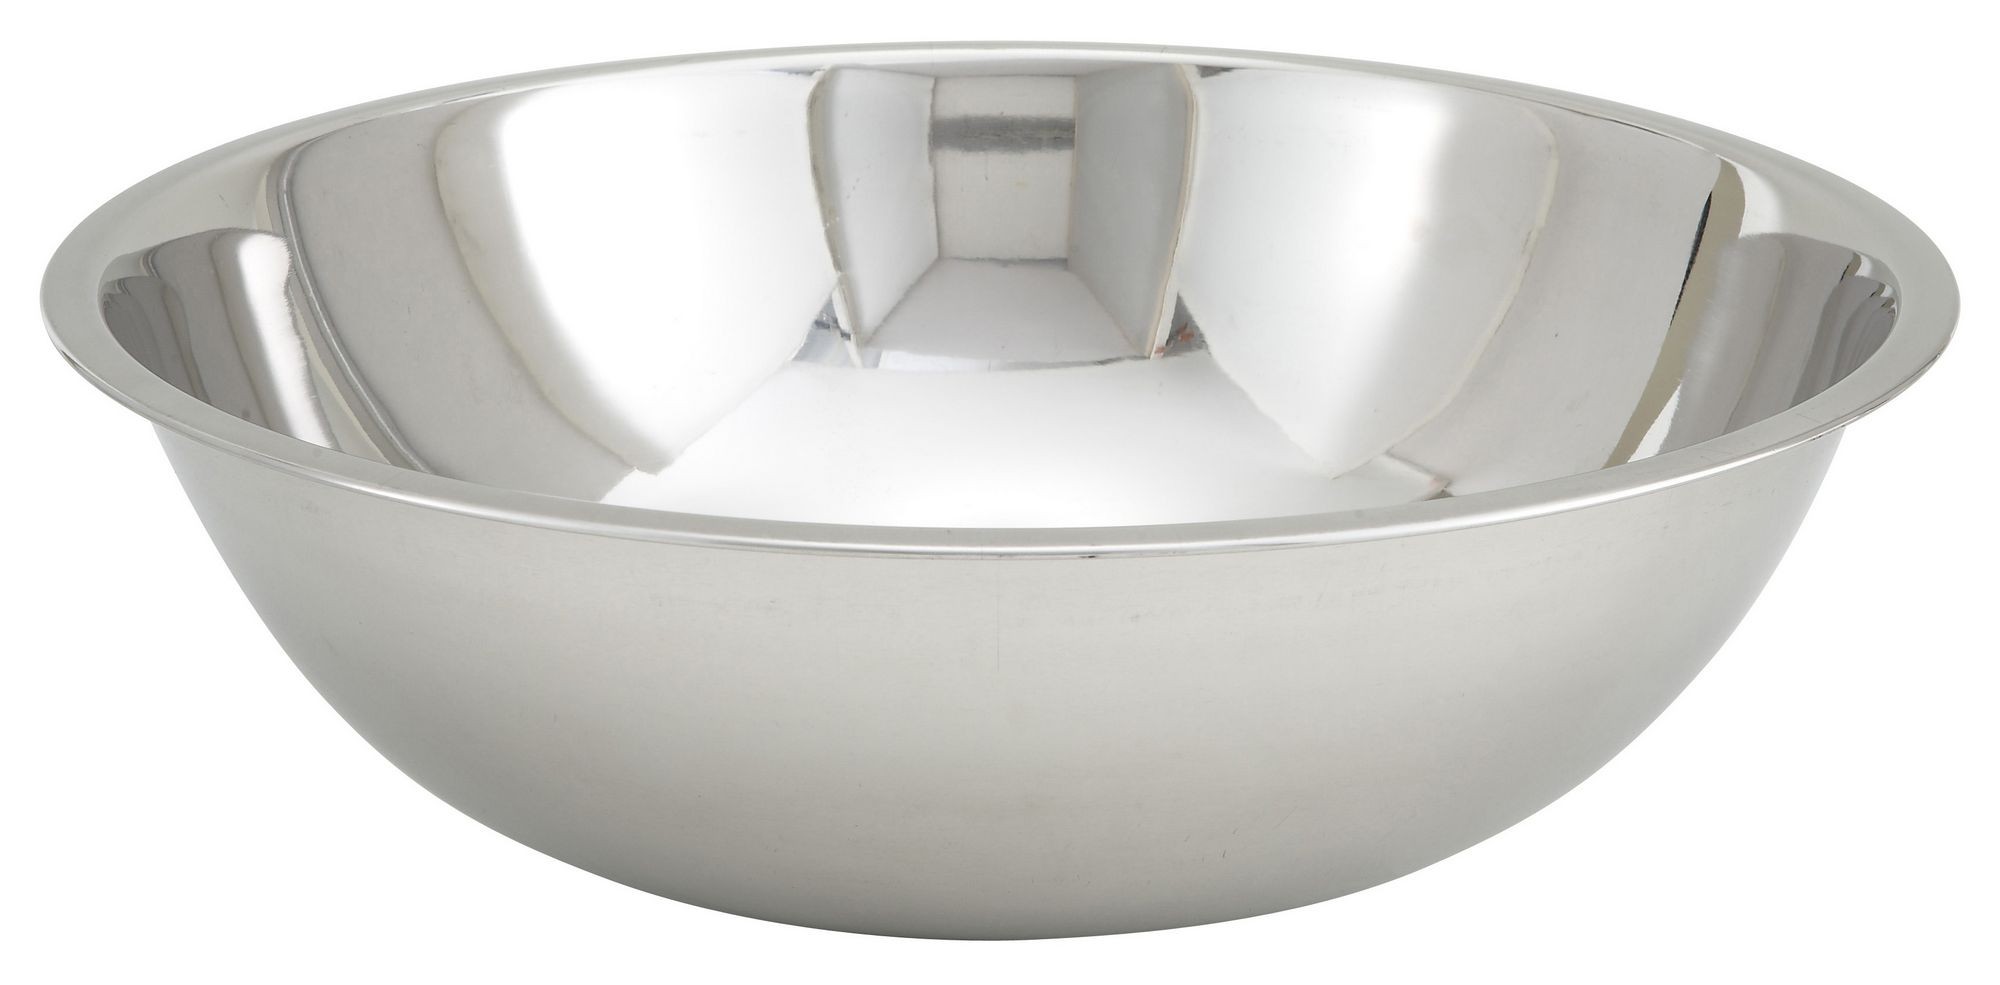 Winco MXBT-1600Q Stainless Steel All-Purpose Mixing Bowl 16 Qt.